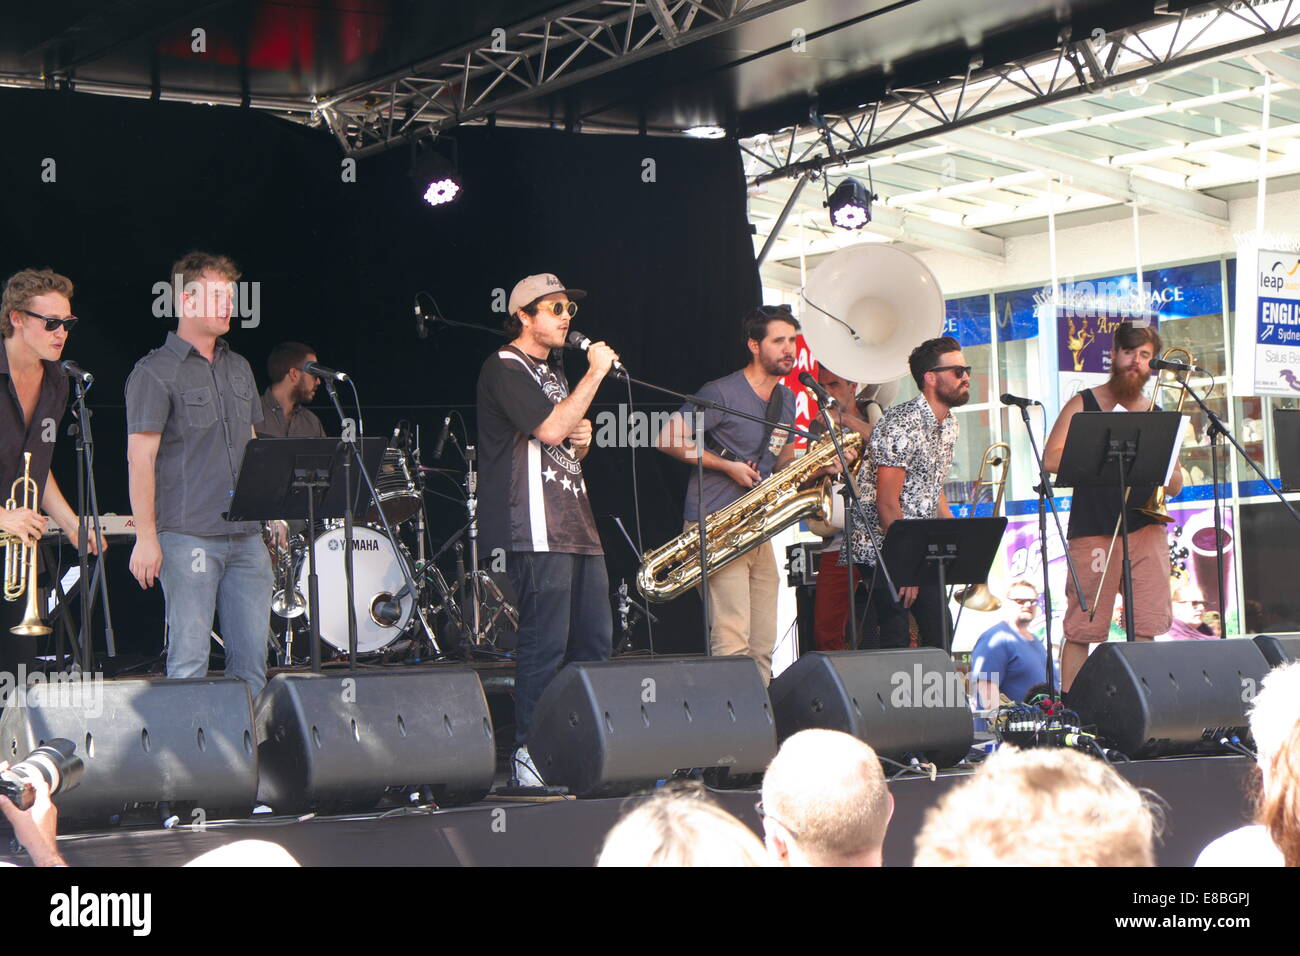 Sydney, Australia. 4th October, 2014. The 37th annual Manly Jazz Festival runs until 6th October 2014 martin berry live news.hi tops brass band perform Stock Photo